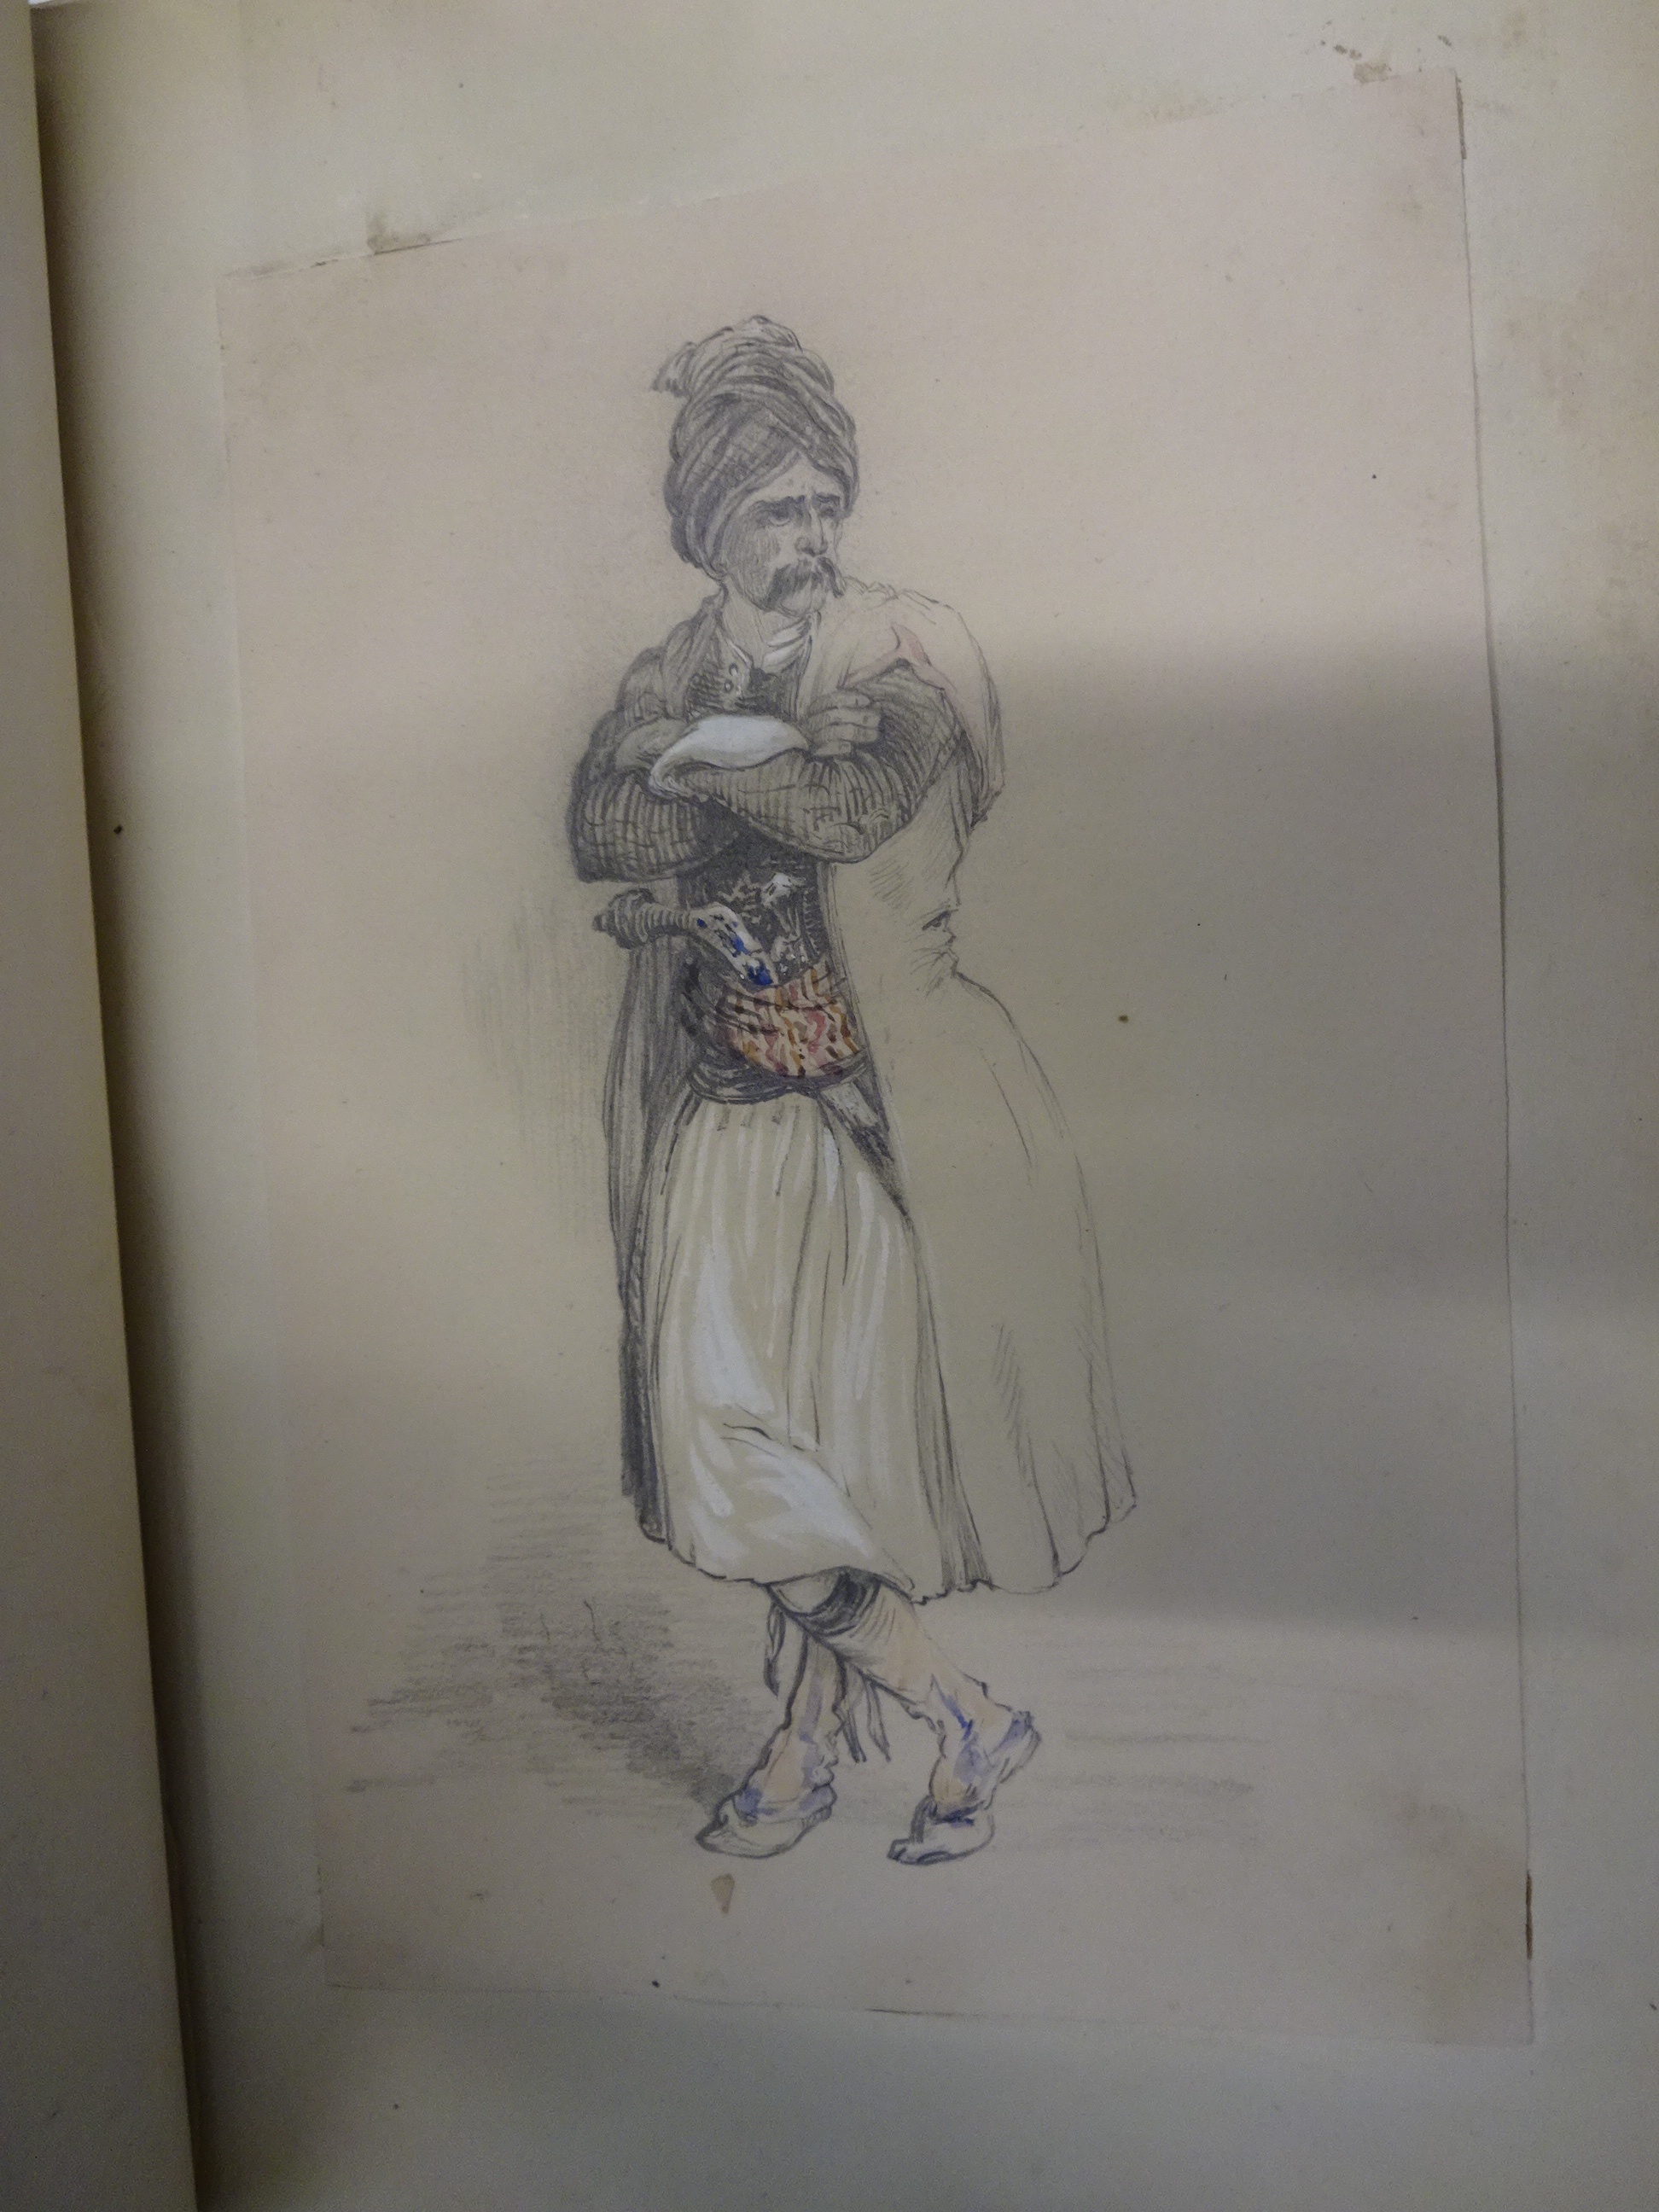 SCRAPBOOK OF VINTAGE PRINTS ENGRAVINGS ETC PLUS SOME ORIGINAL SKETCHES AND HAND COLOURINGS - Image 7 of 9